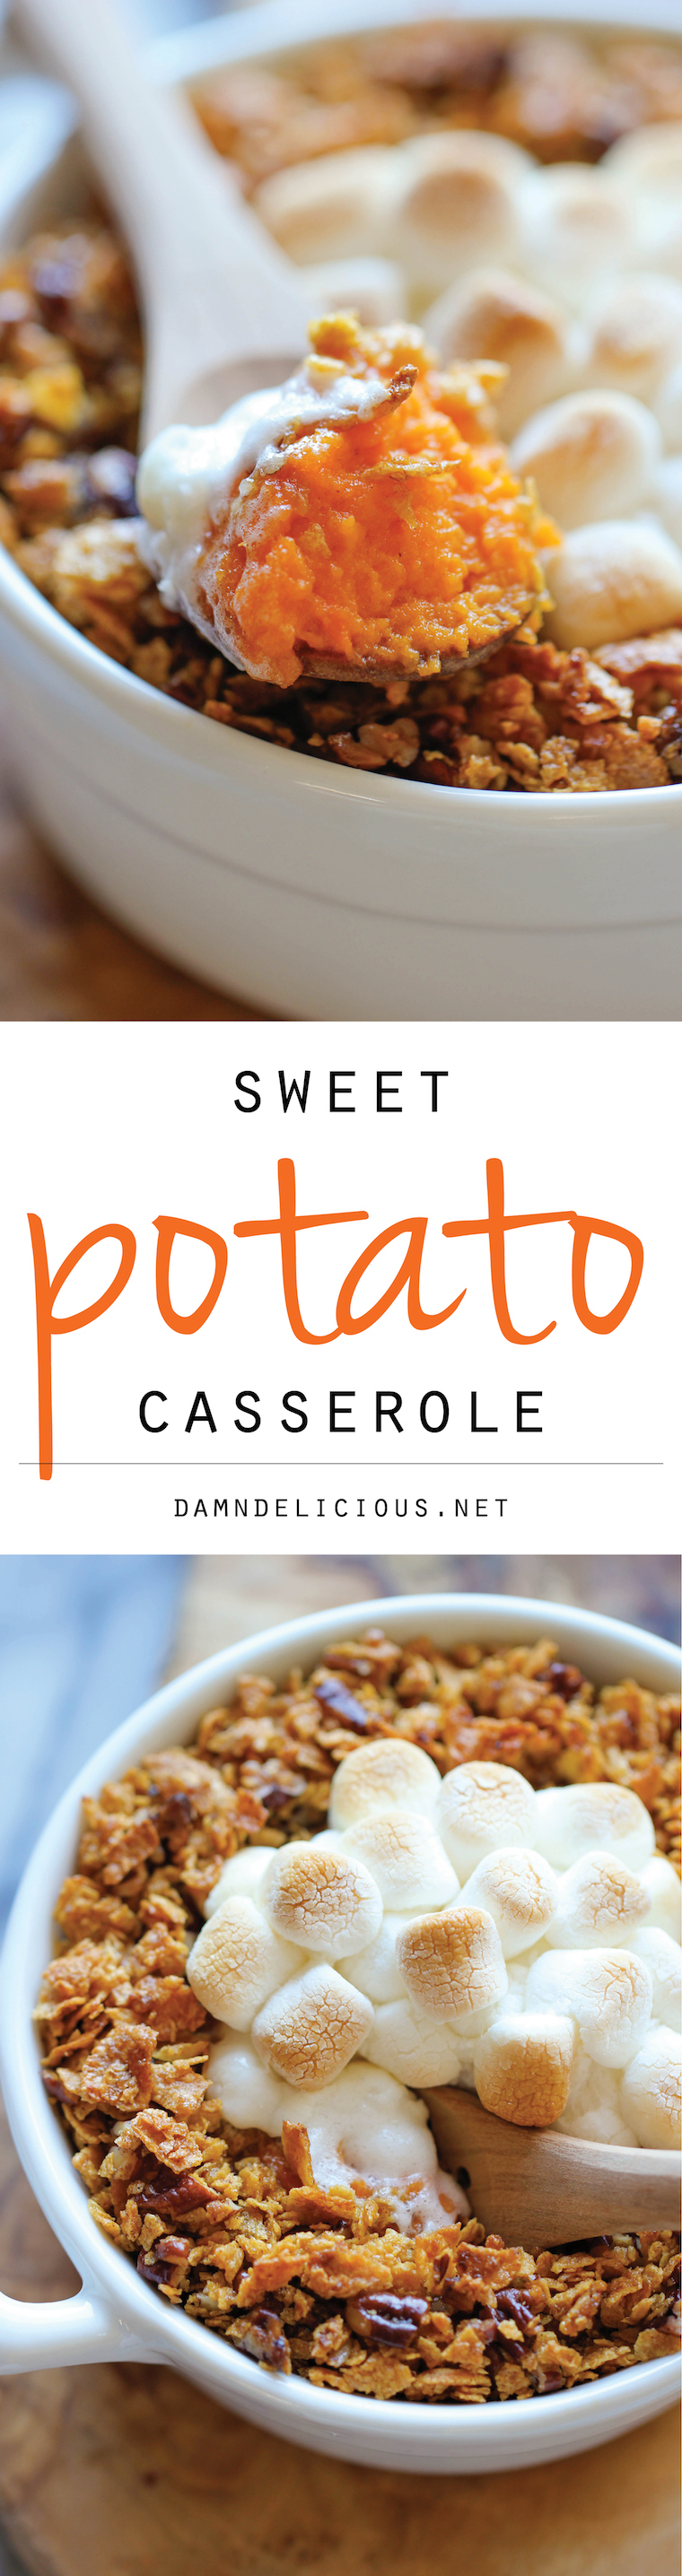 Sweet Potato Casserole -Made with mashed roasted sweet potatoes and a crunchy pecan topping with an ooey gooey melted marshmallow center!